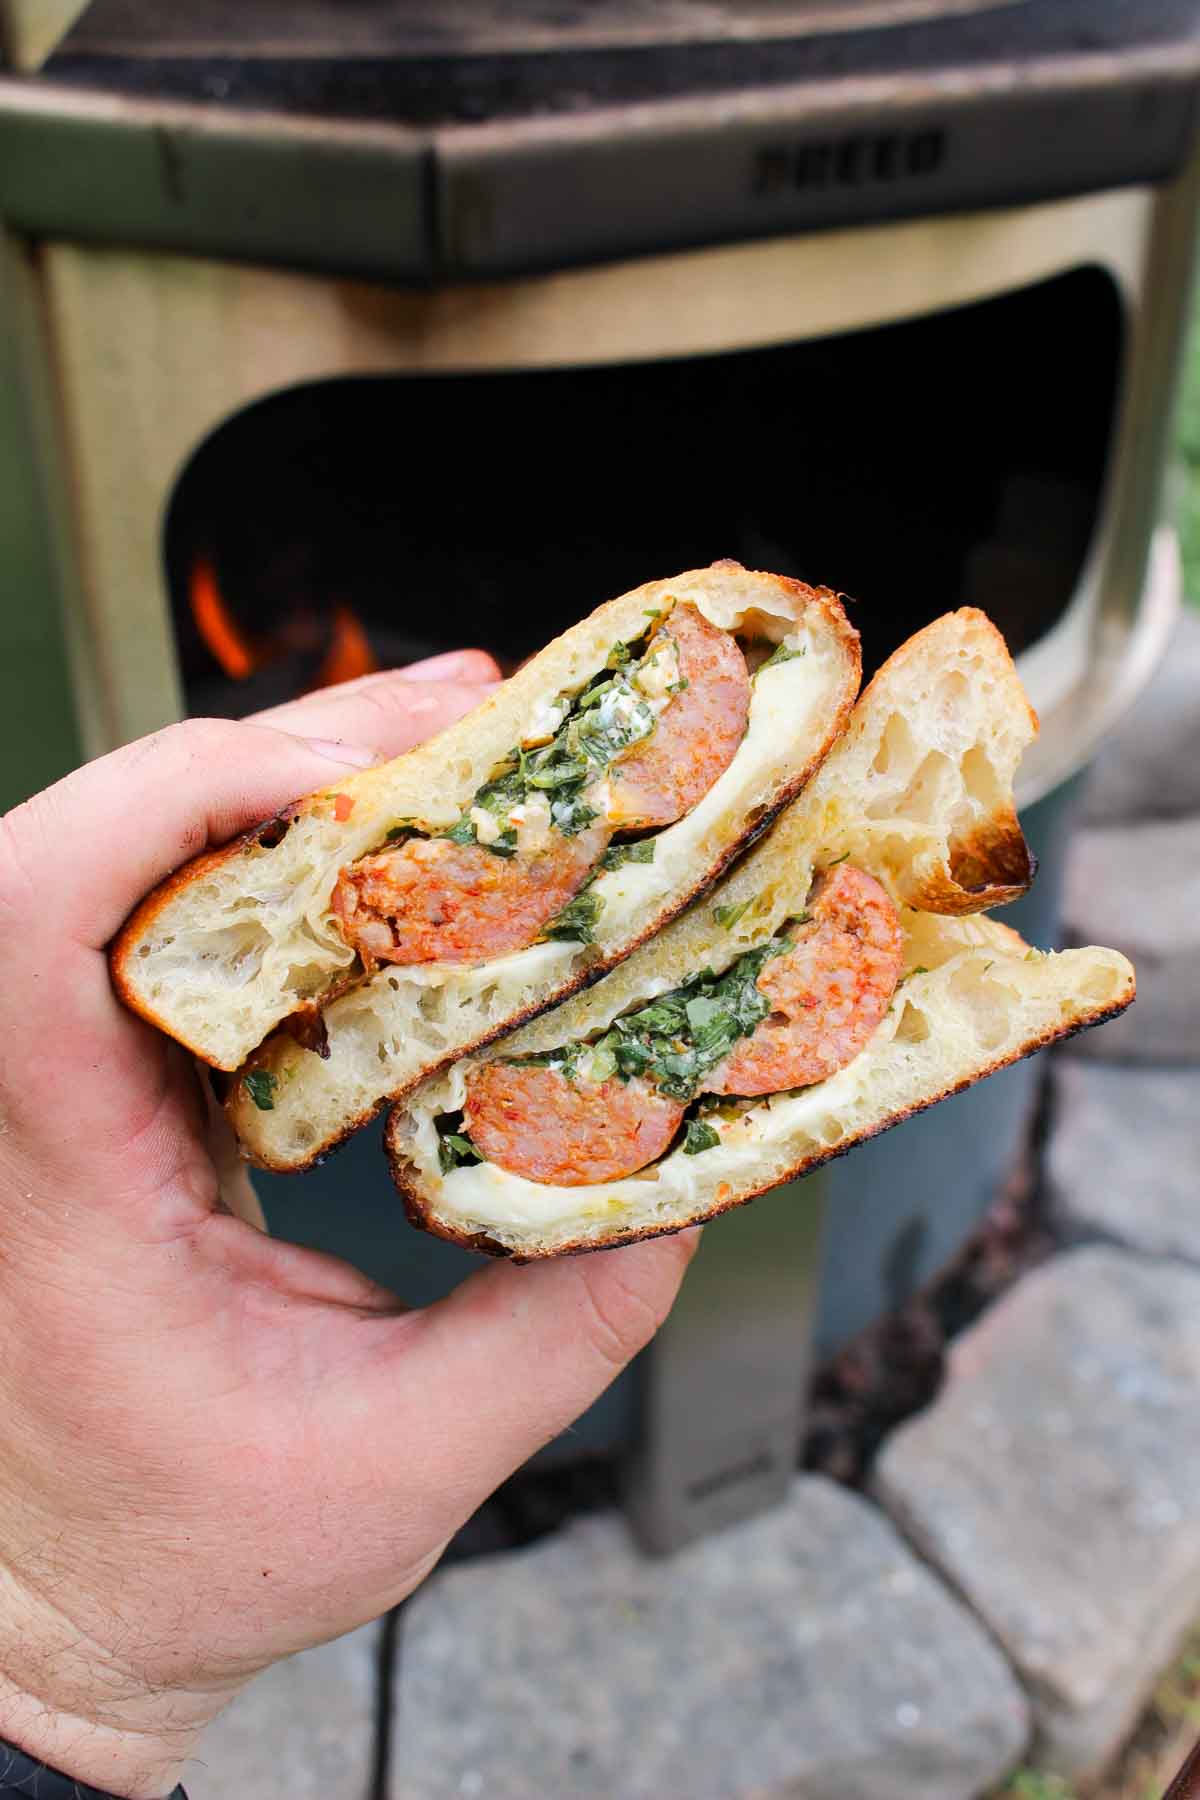 The viral pizza sandwich is ready to eat. 